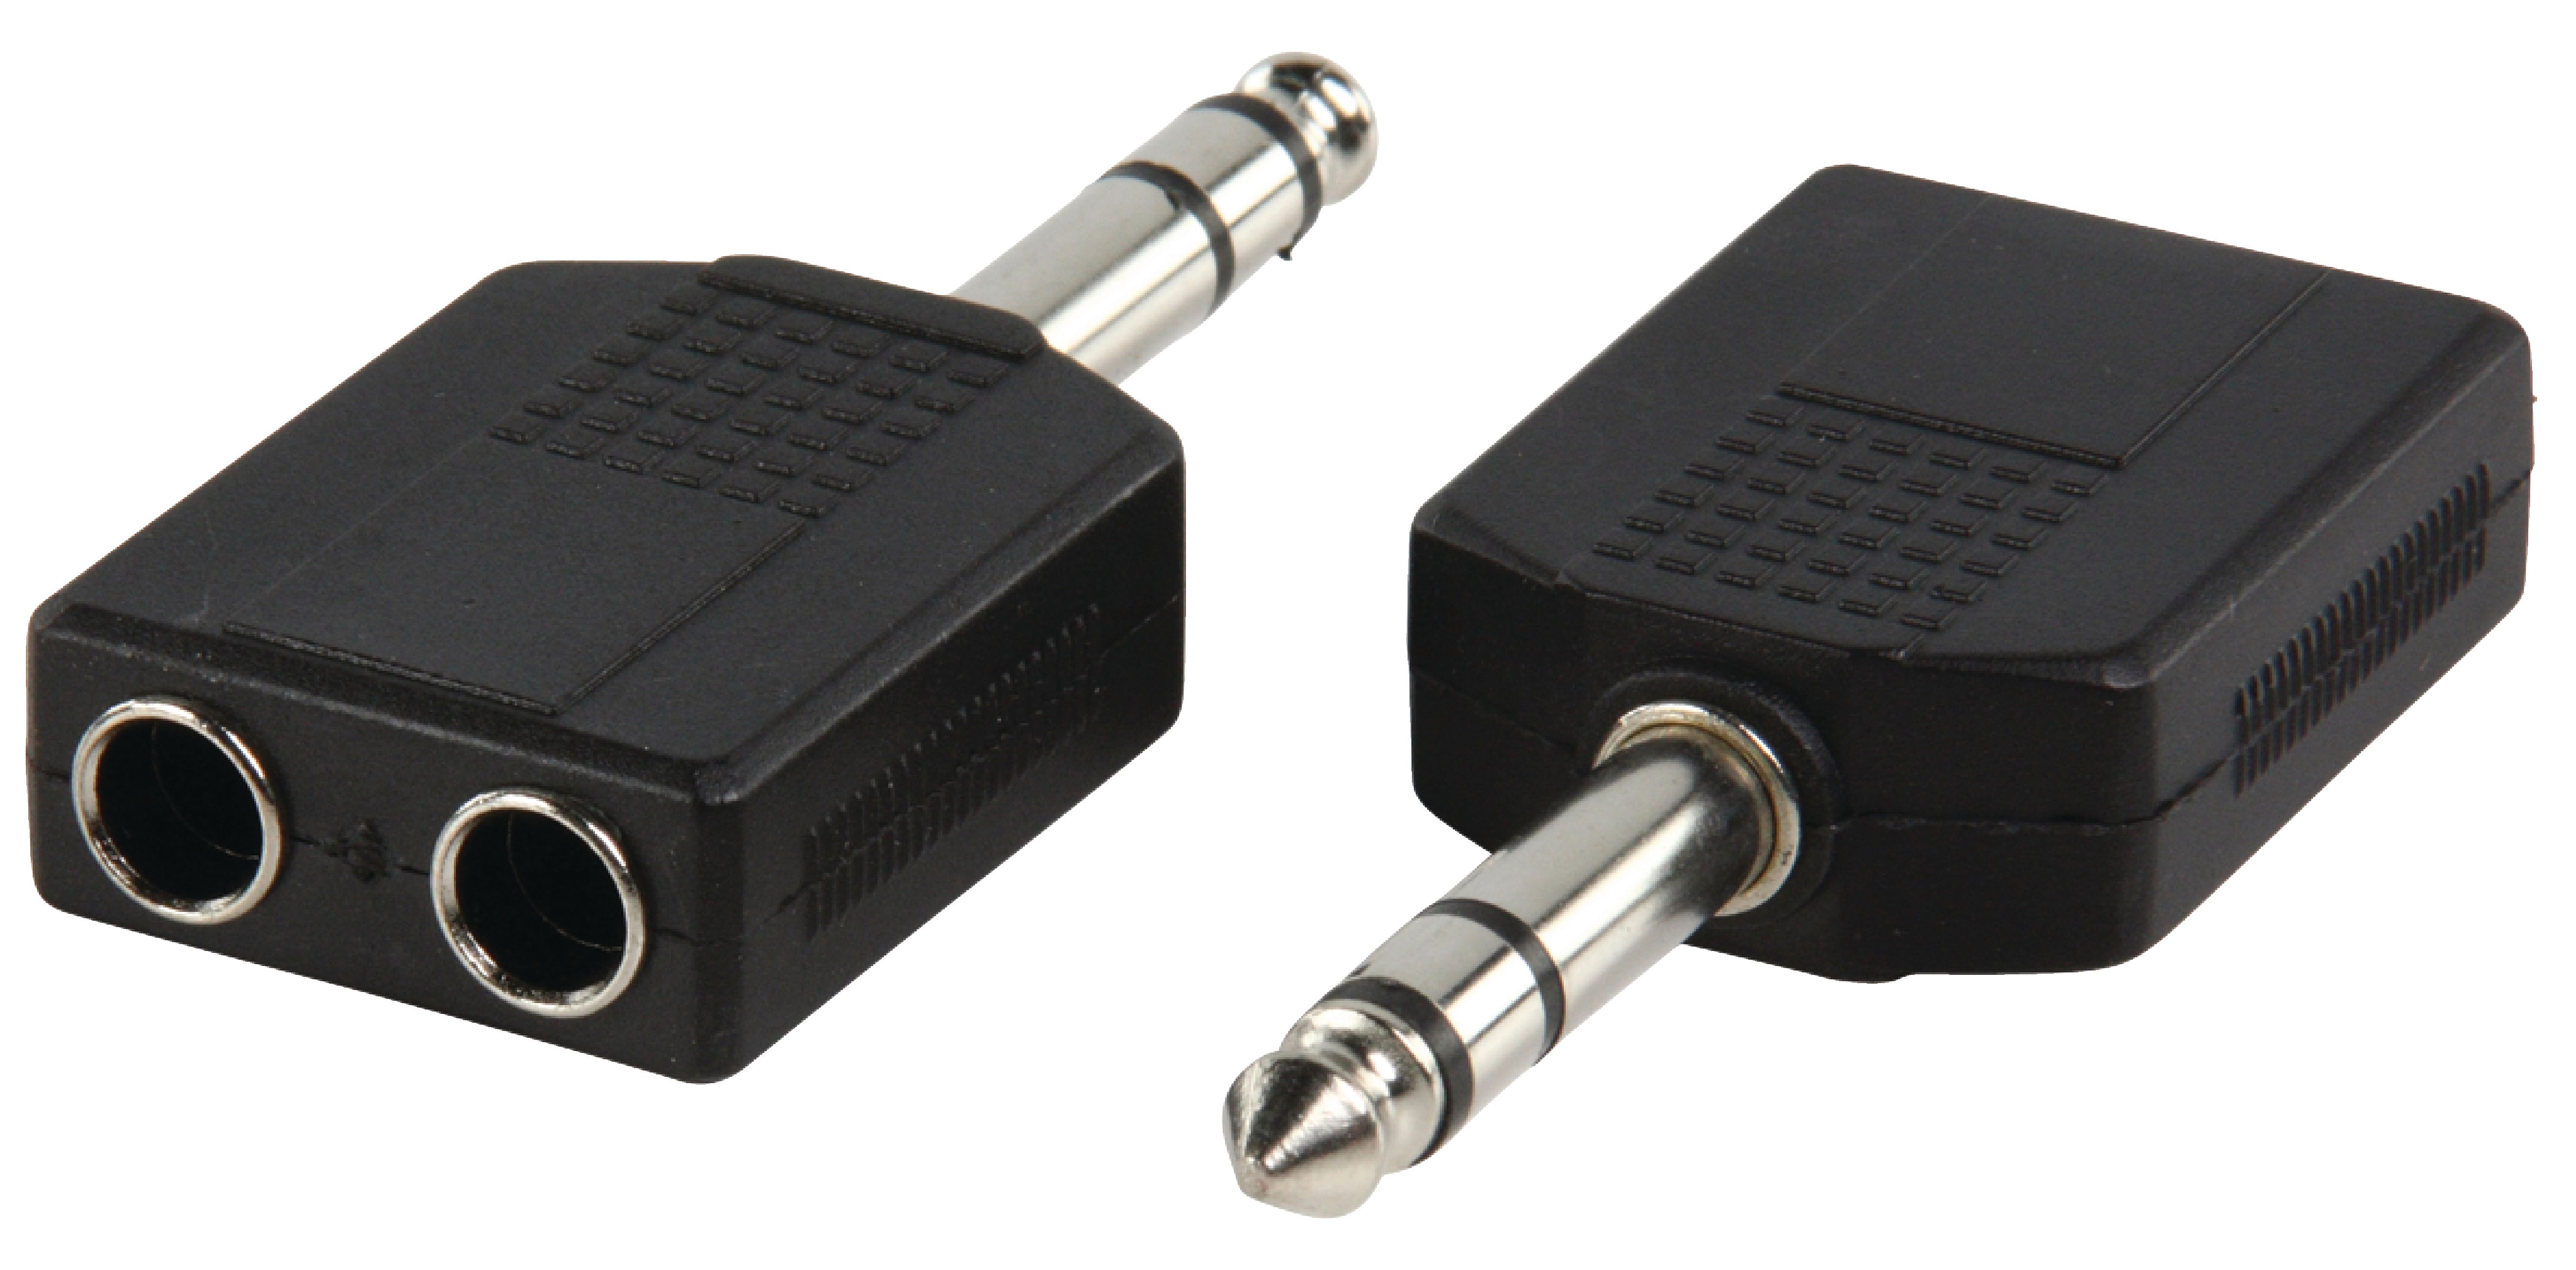 Adaptateur audio-video jack 6.35mm male stereo / 2 x jack 6.35mm femelle stereo